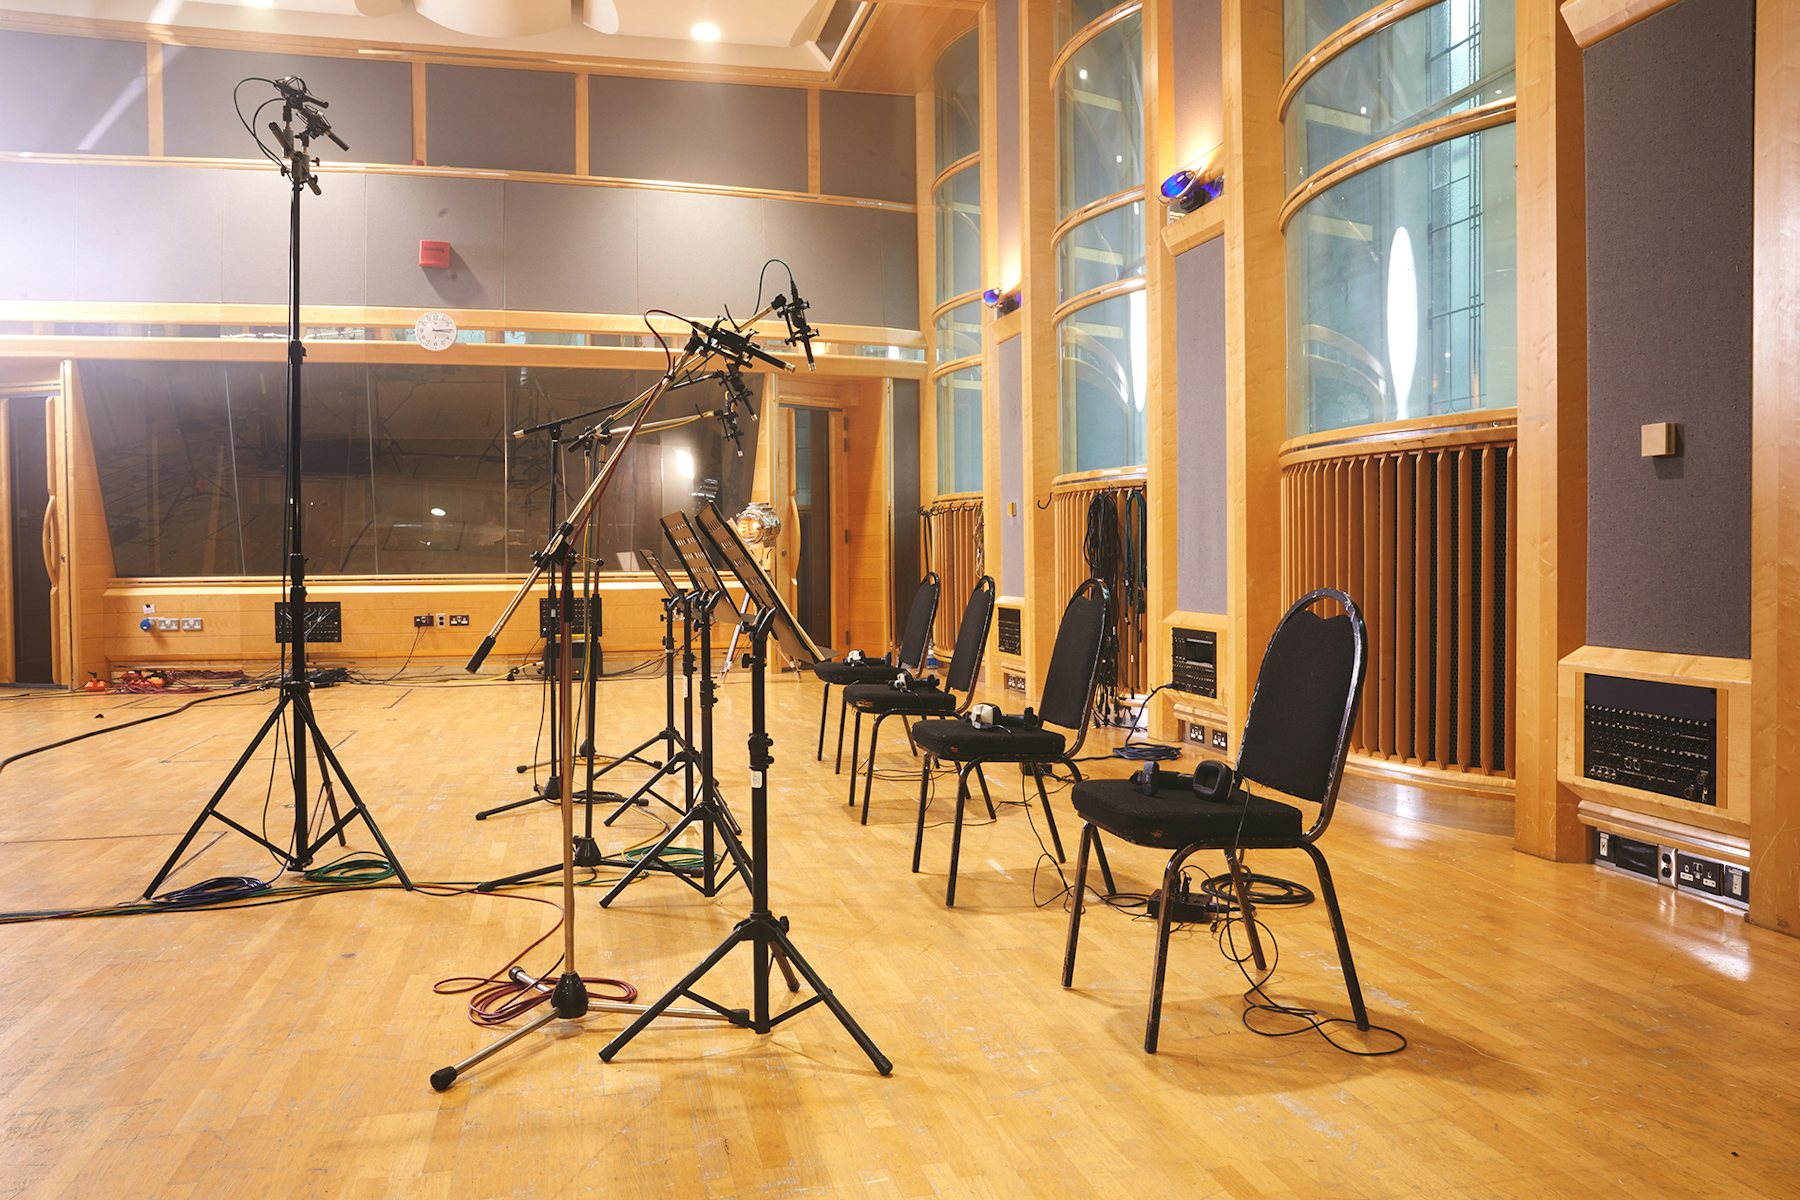 microphones and chairs set up for recording